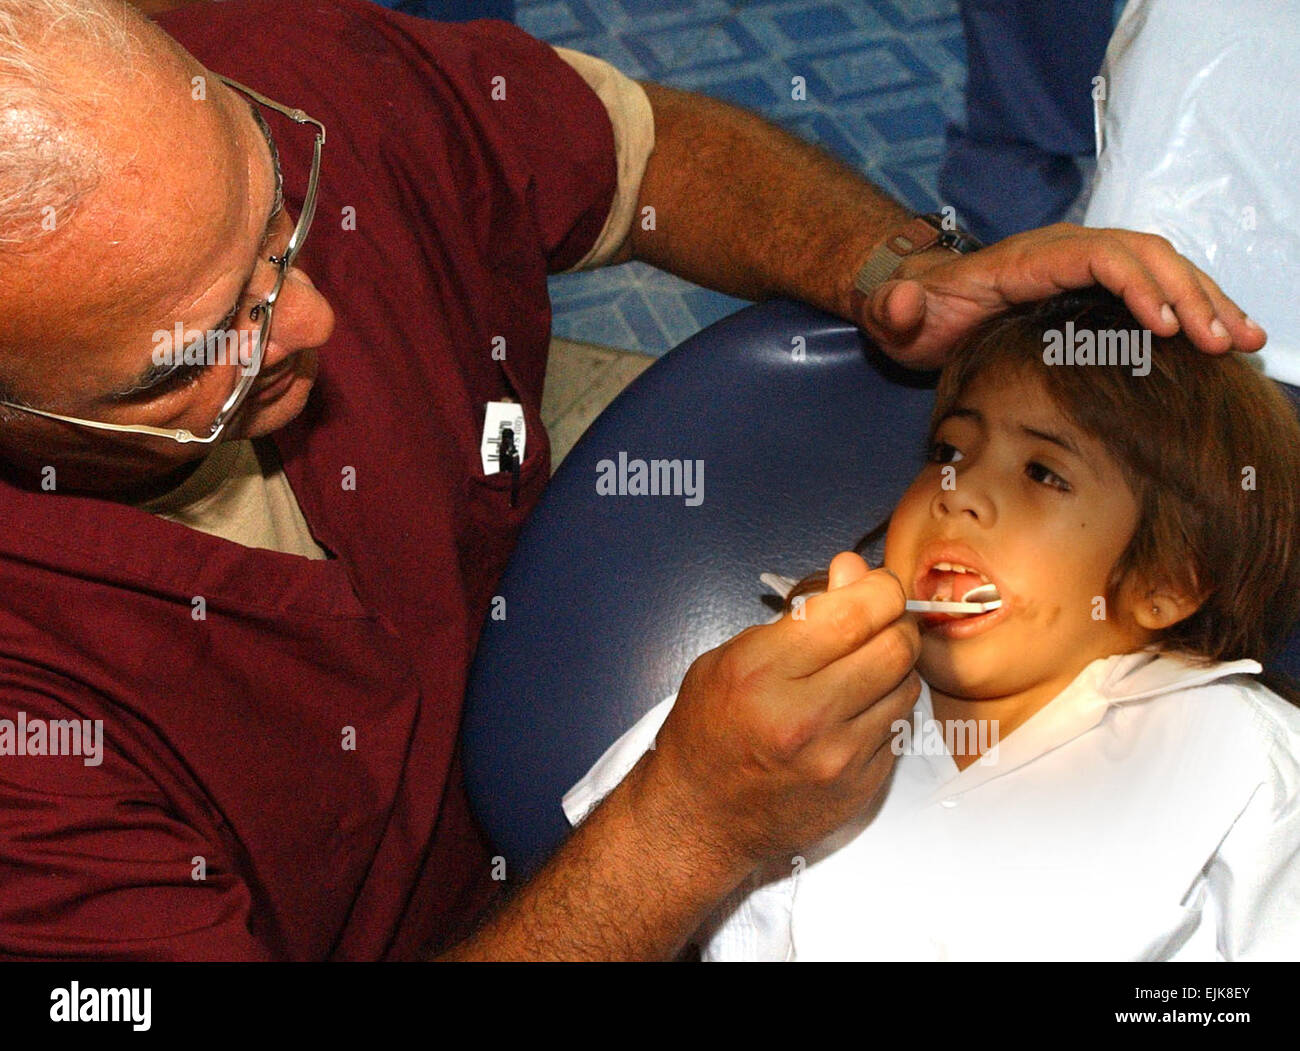 U.S. Army Lt. Col. Manuel Marien, a pediatric dentist from Fort Hood, Texas, examines the teeth of a Honduran child during a medical readiness training exercise in Tegucigalpa, Honduras, Aug. 14, 2007.  U.S. Army Soldiers and U.S. Air Force Airmen are helping hundreds of Honduran children and providing much needed dental care at the Catholic University Dental School.  1st Lt. Erika Yepsen Released Stock Photo